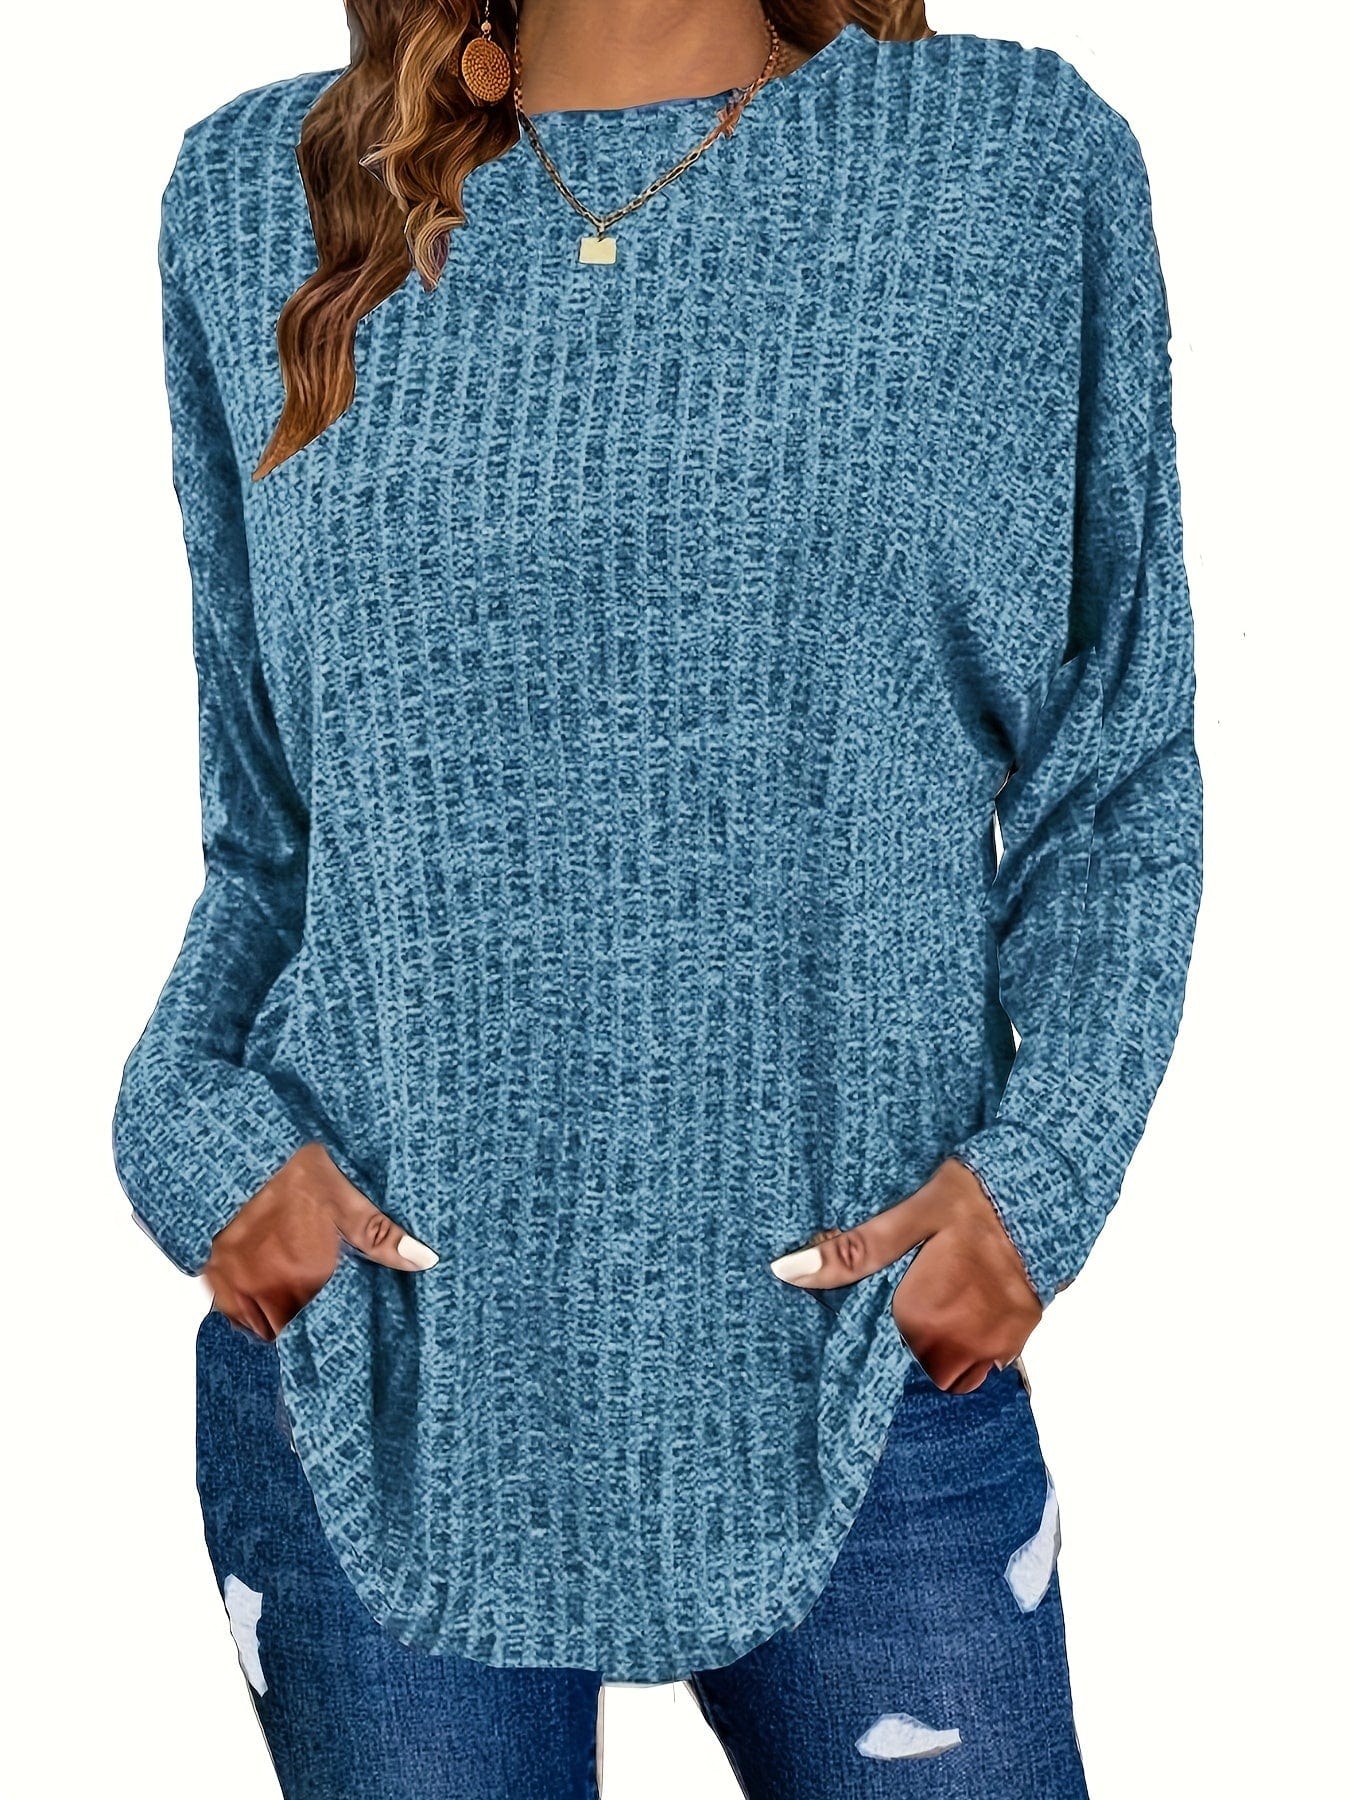 Plus Size Casual Sweater, Women's Plus Solid Ribbed Long Sleeve Round Neck Knit Top PLU2309A1609BLUPlus 1XL(14/16) Blue / Plus 1XL(14/16)